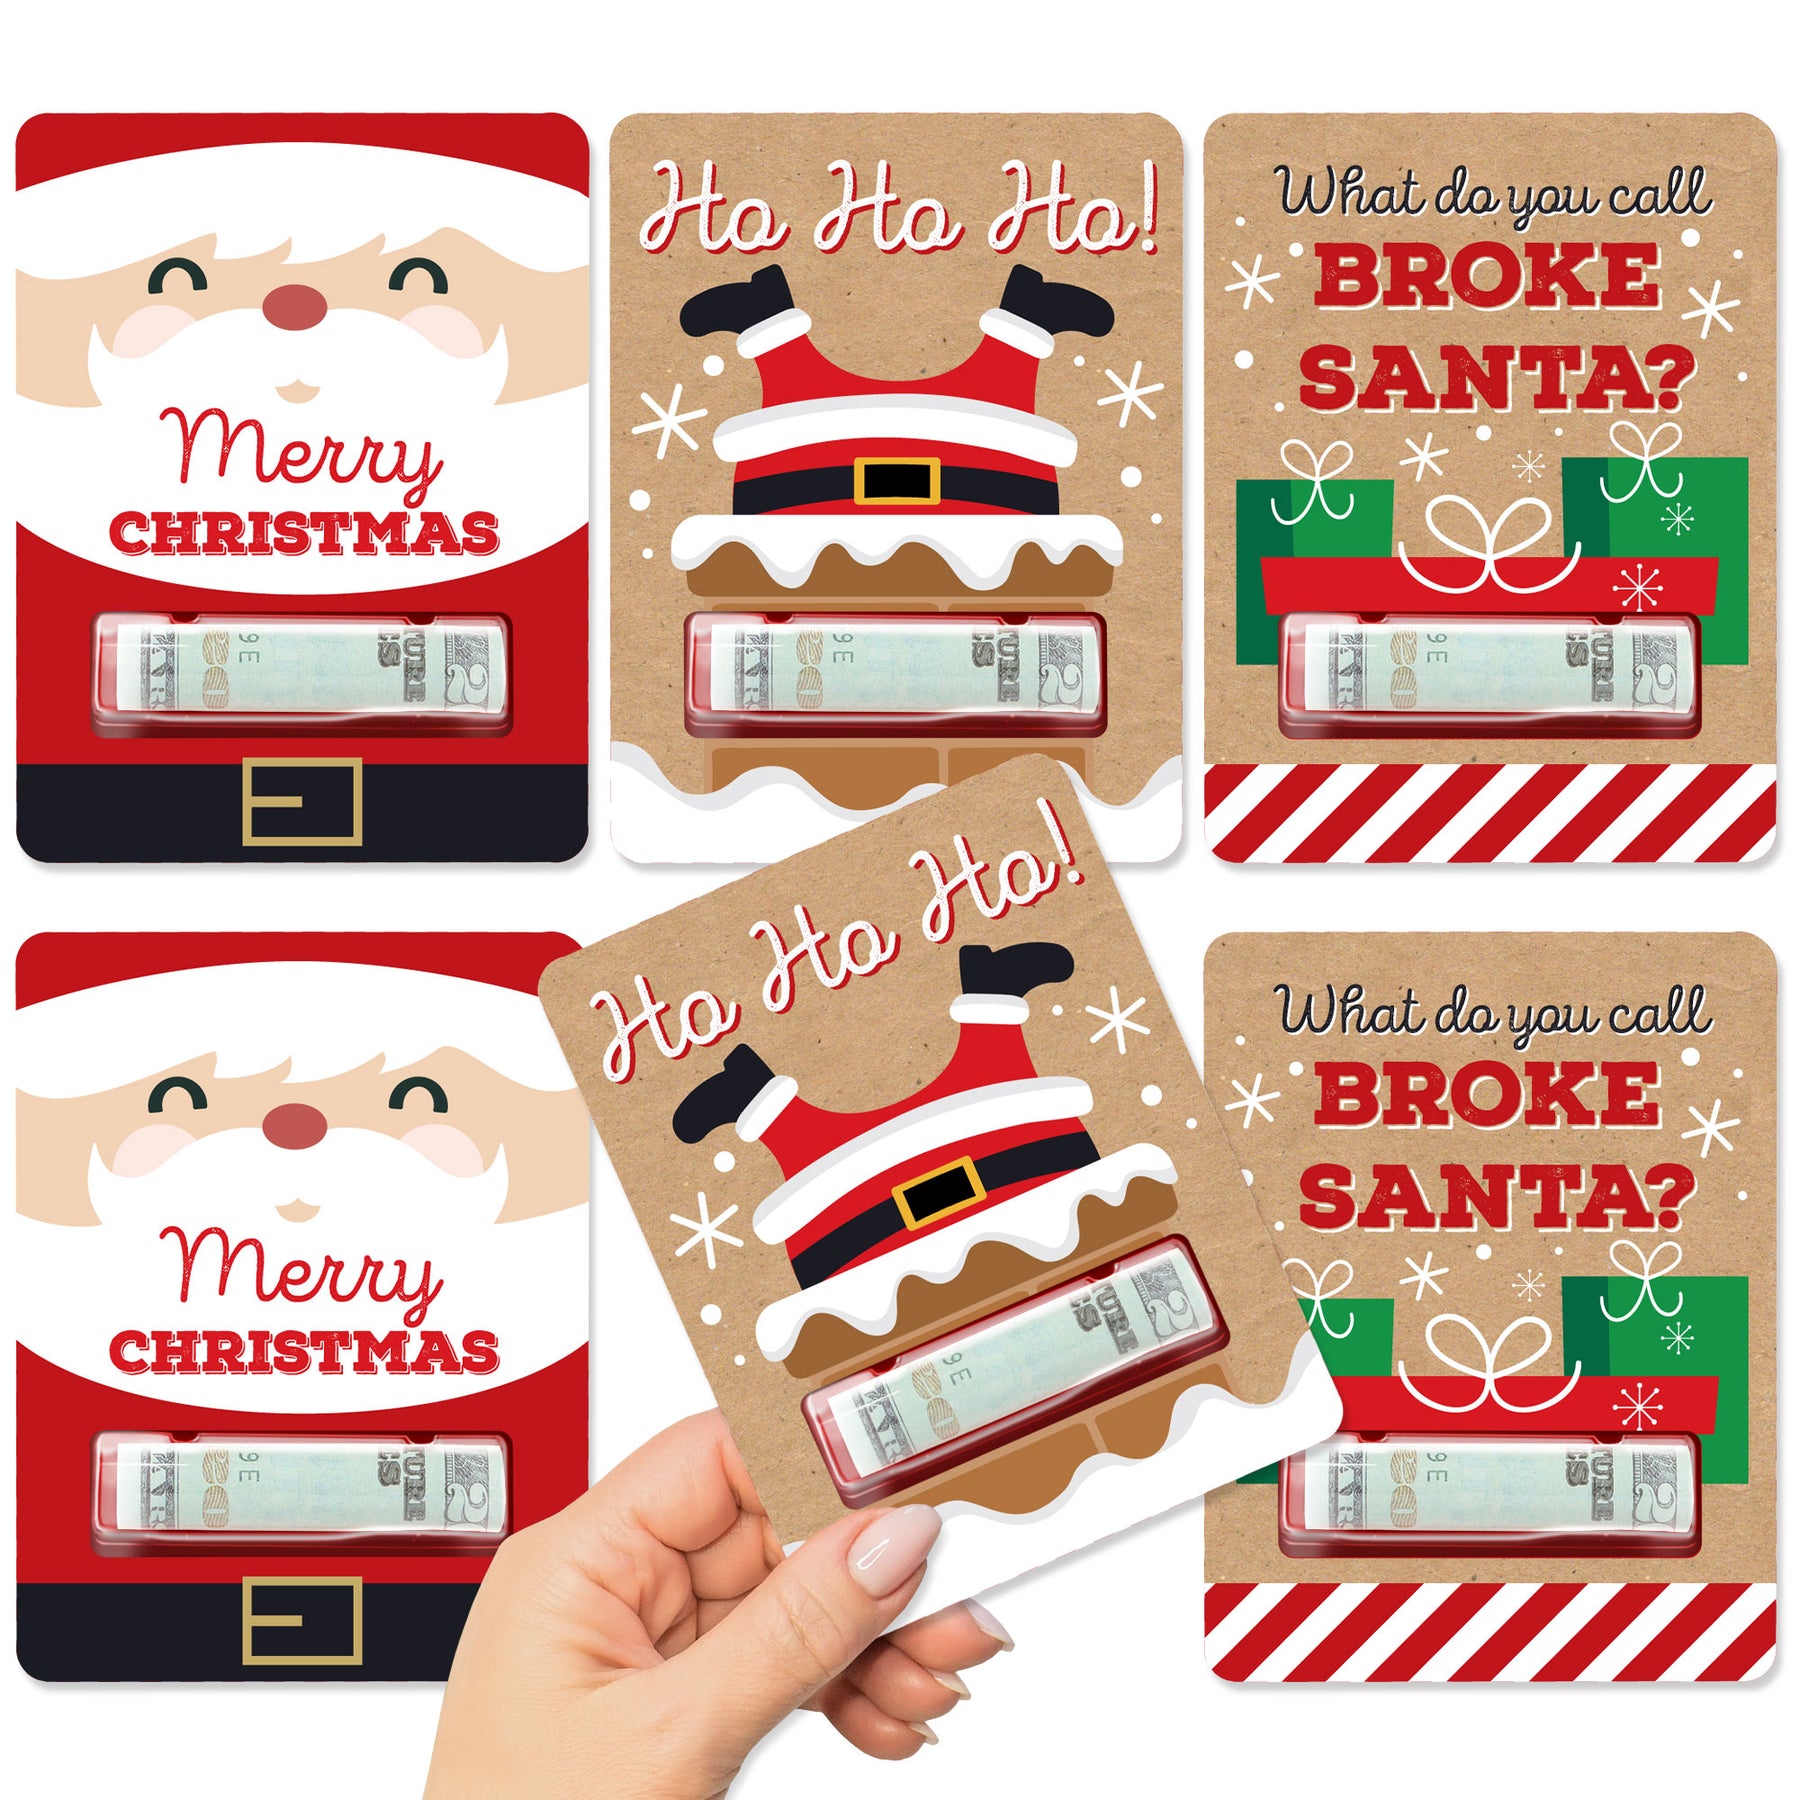 50 DIY Christmas Gift Tags to Write Heartfelt Messages